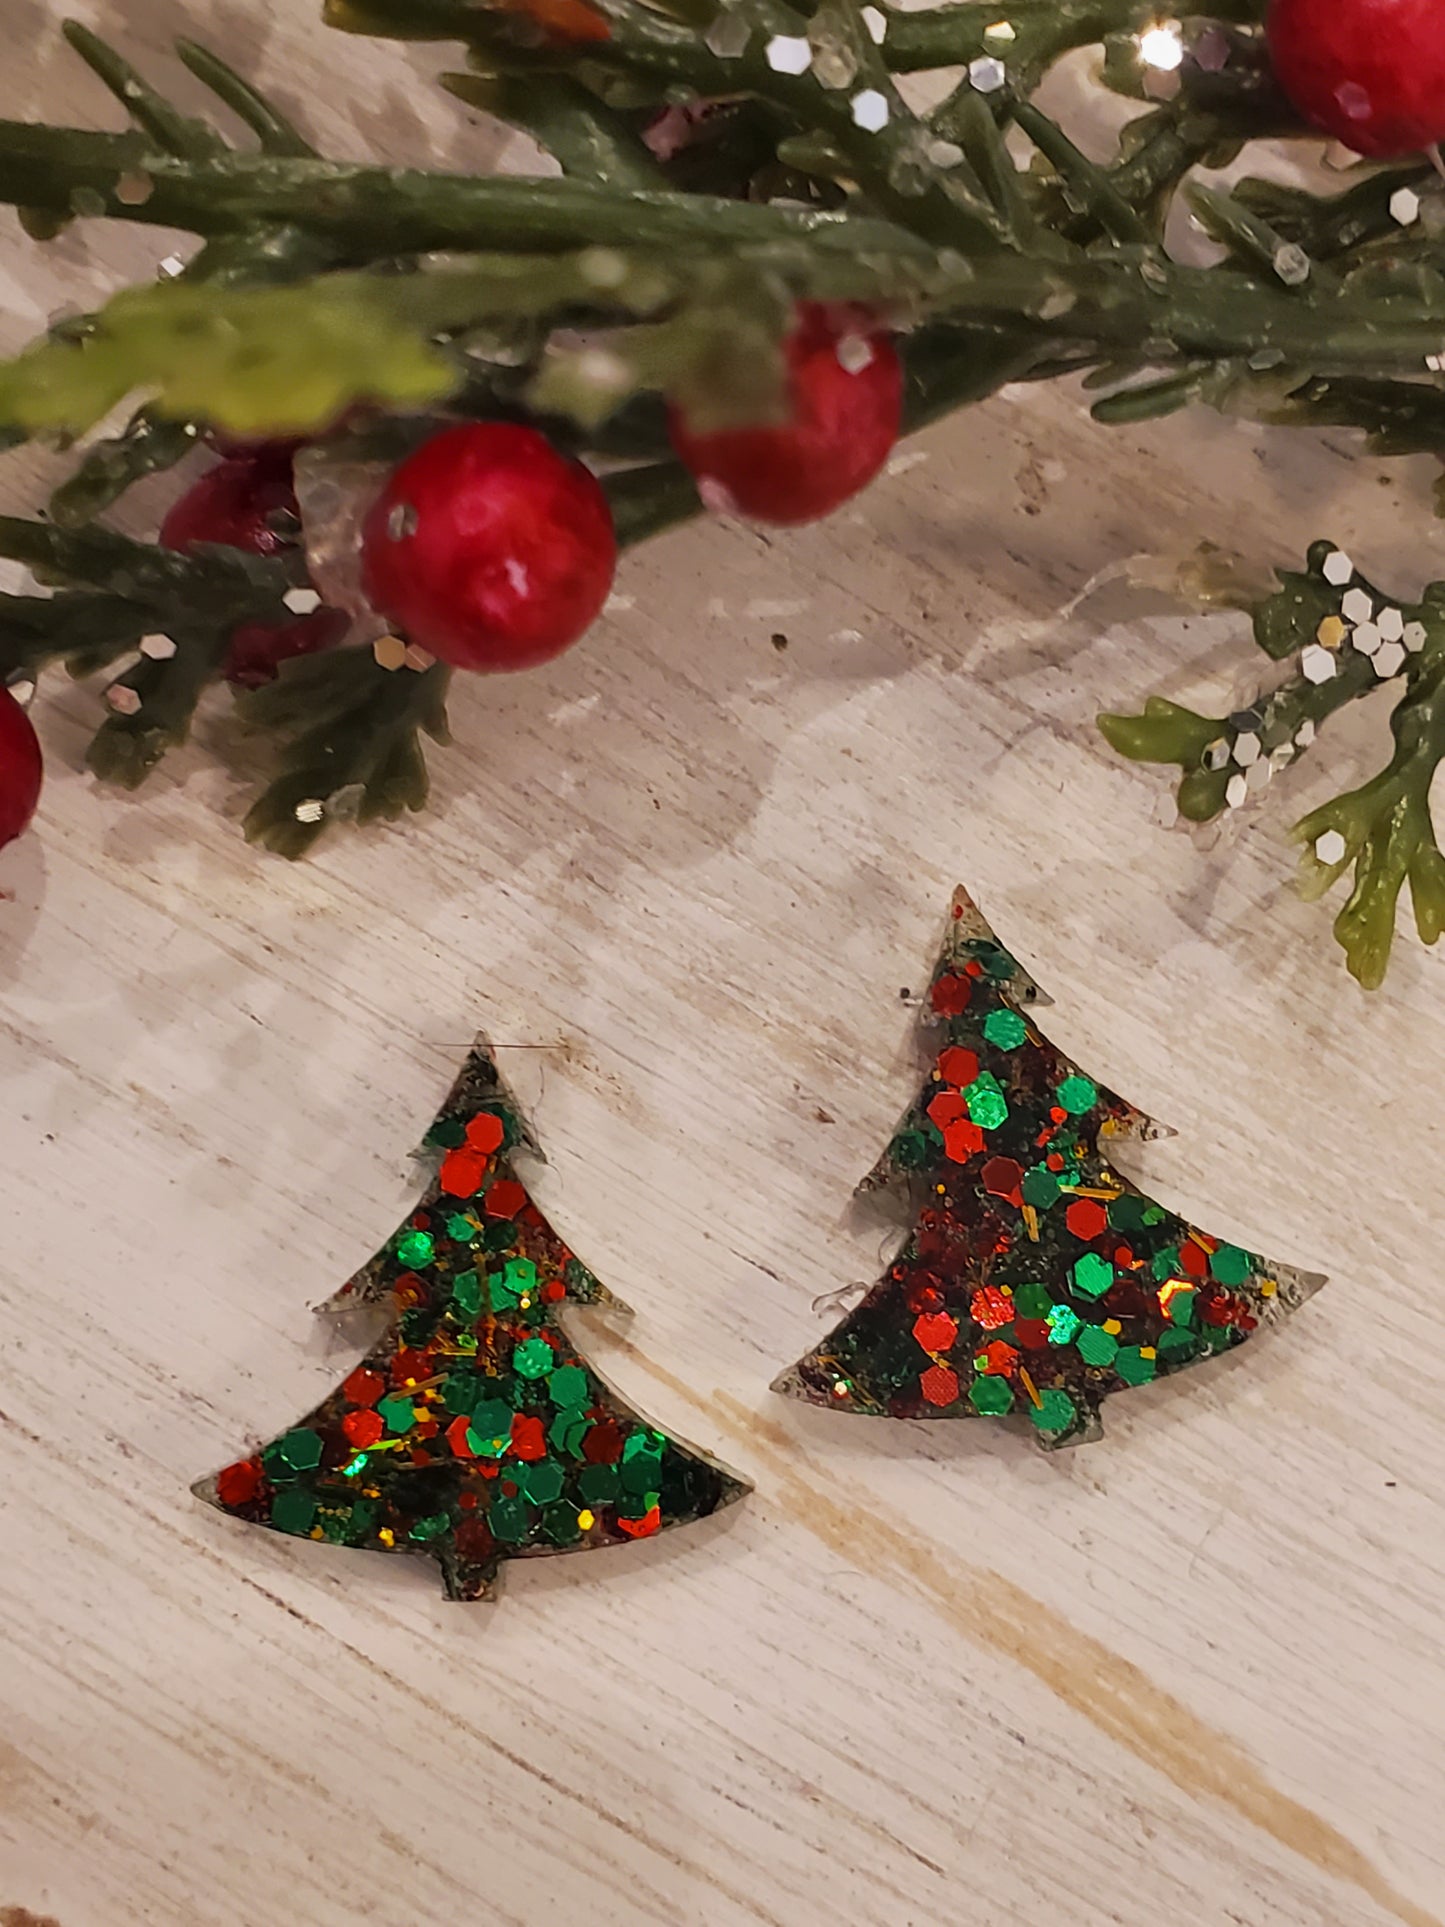 Handmade resin and glitter Christmas Tree Green/Red  earrings small studs